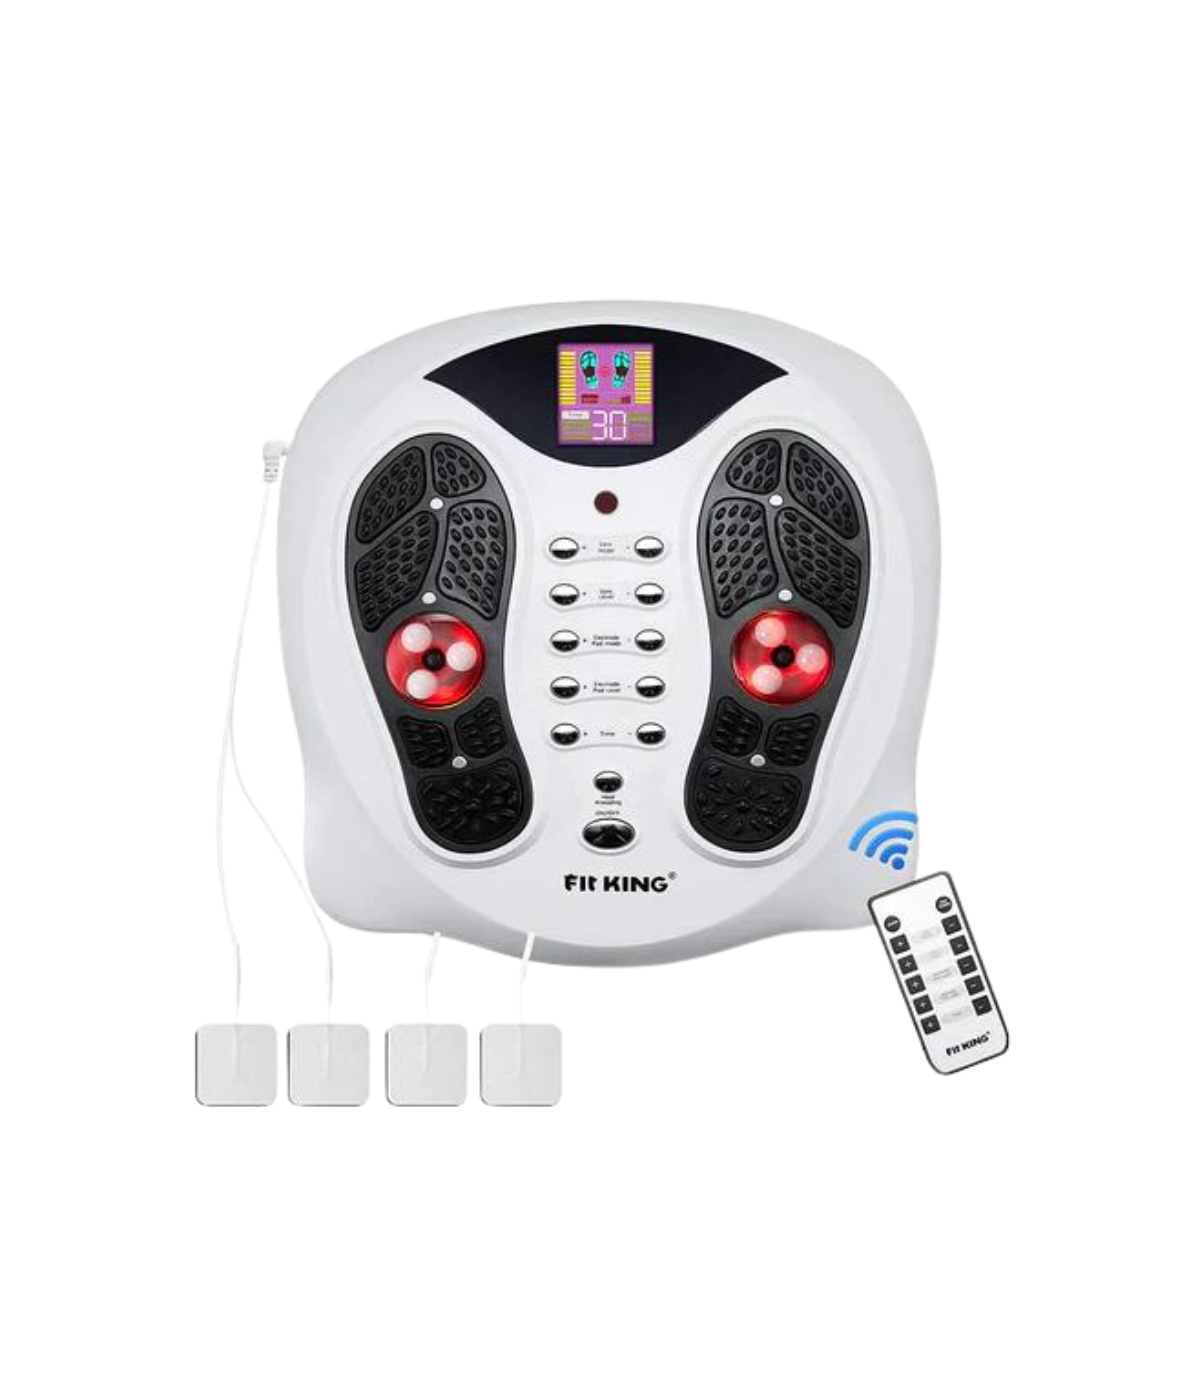 Compact and portable foot massager